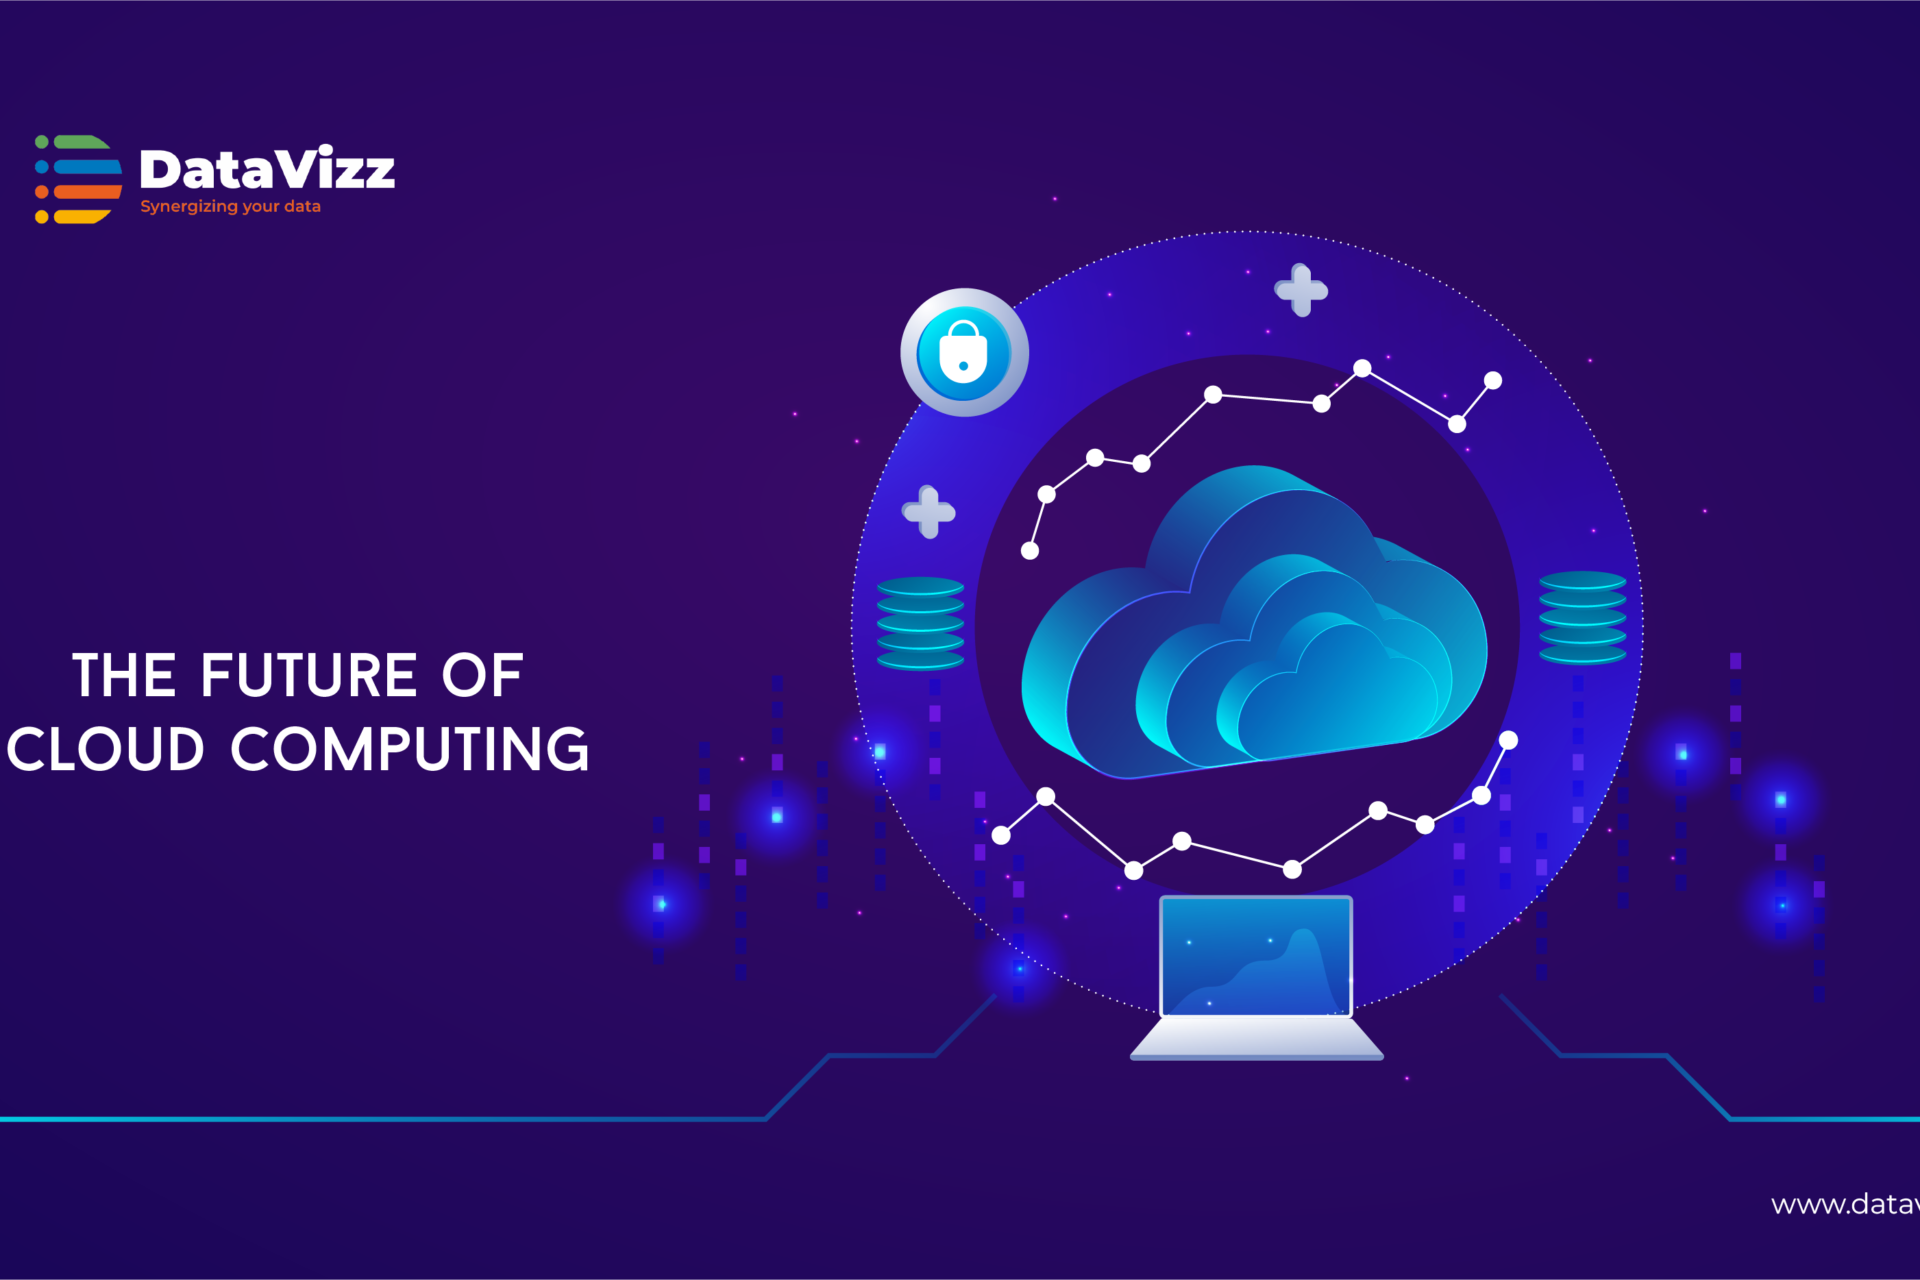 https://datavizz.in/wp-content/uploads/2022/05/Serverless-The-Future-of-Cloud-Computing-1920x1280.png